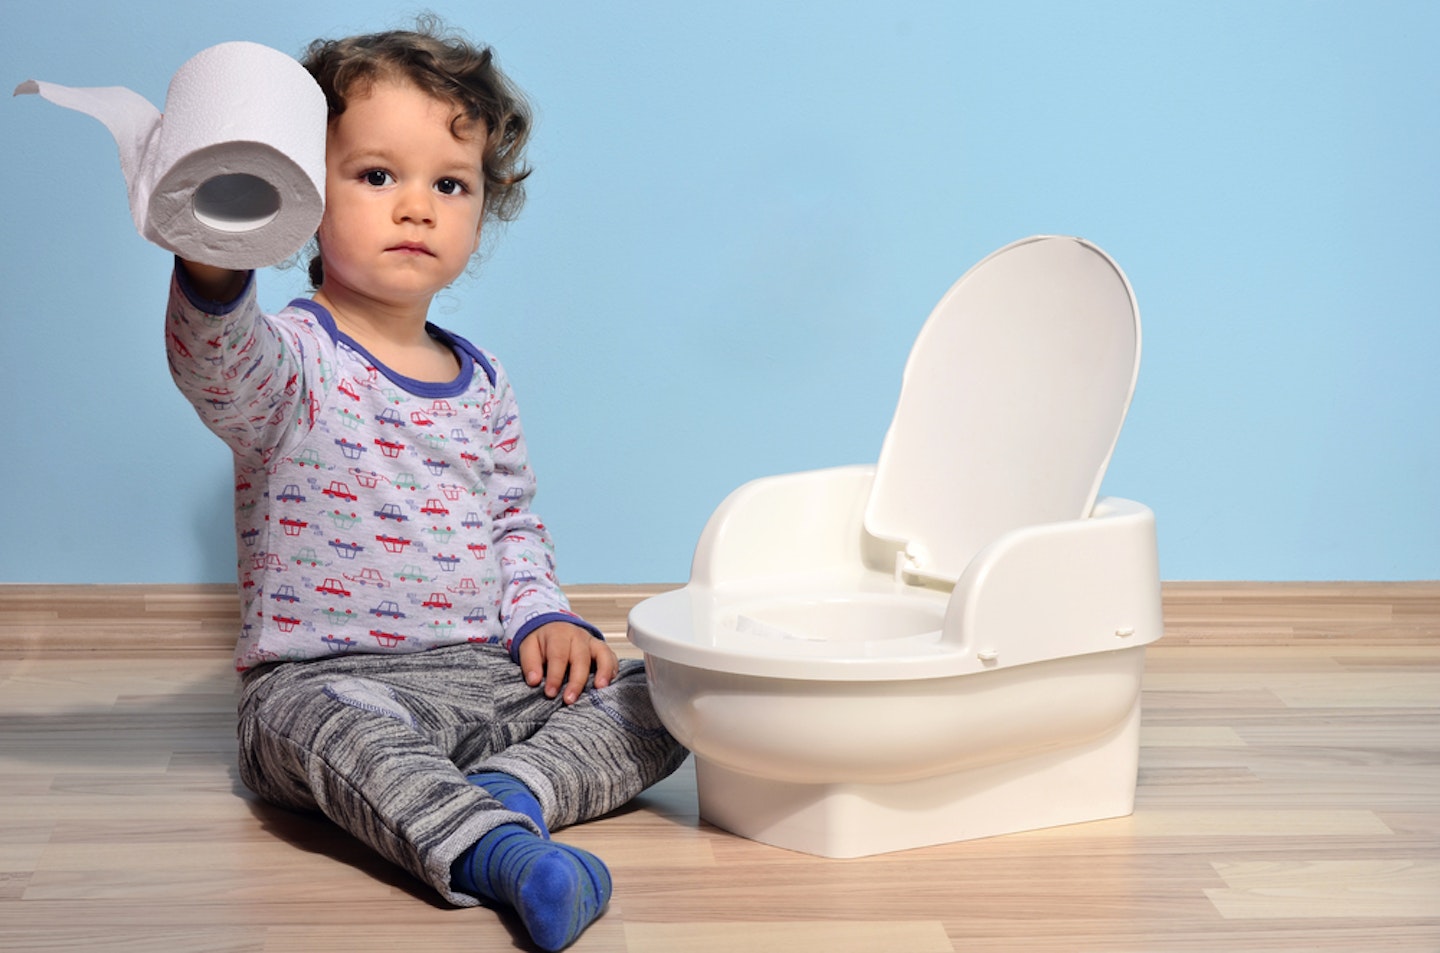 Toddler next to potty holding toilet roll